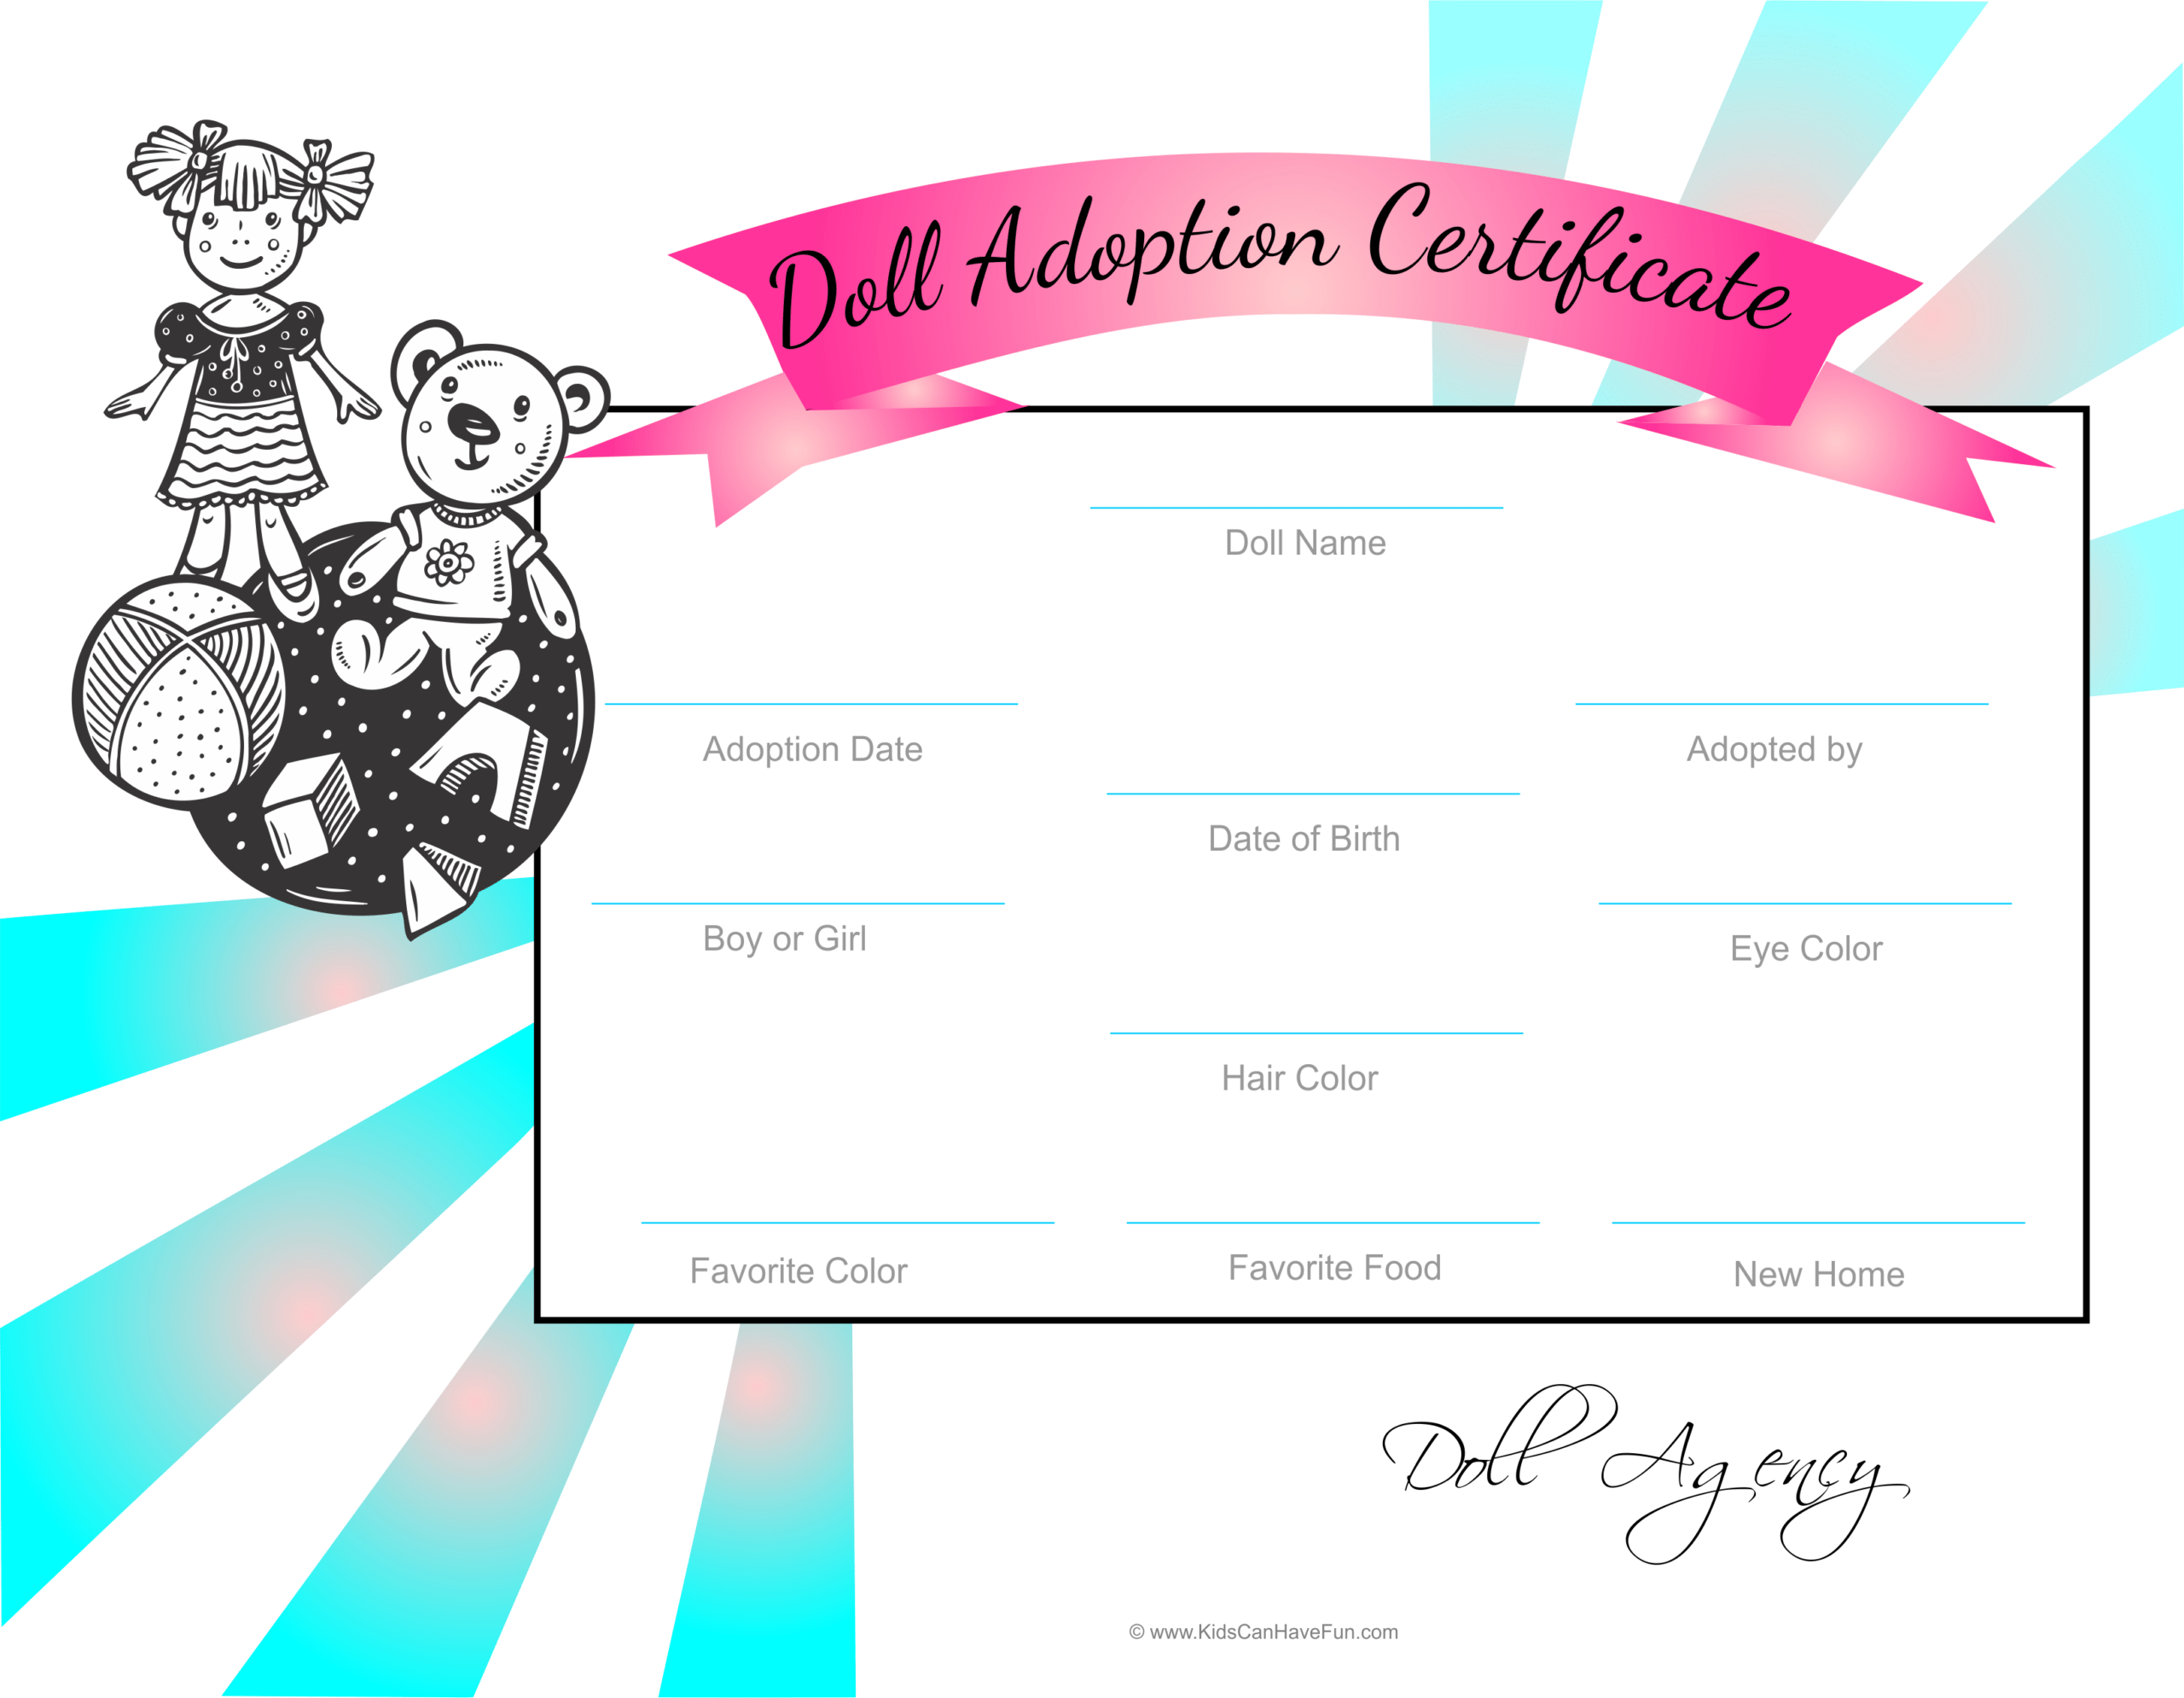 Certificate Templates: Doll Adoption Certificate Template Within Toy Adoption Certificate Template